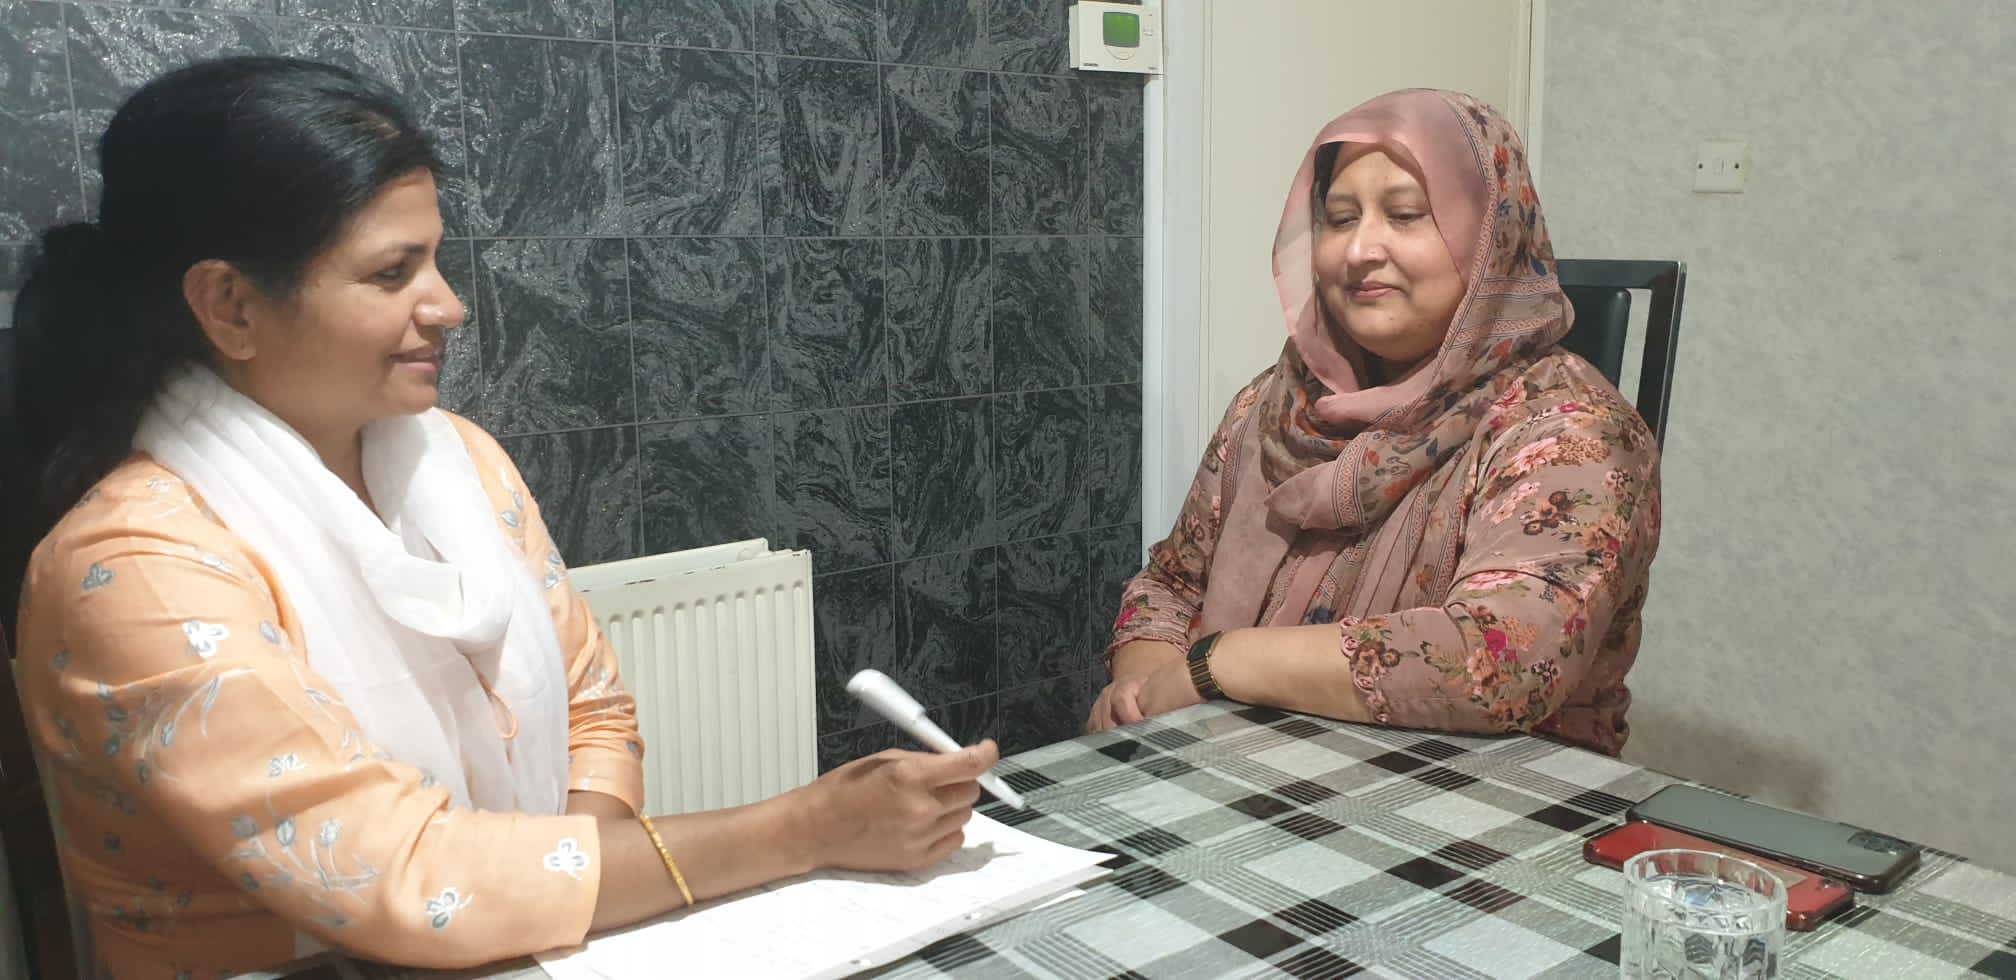 exclusive interview with Mumtaz Hussain, the only Bengali woman councilor candidate in Birmingham City Council